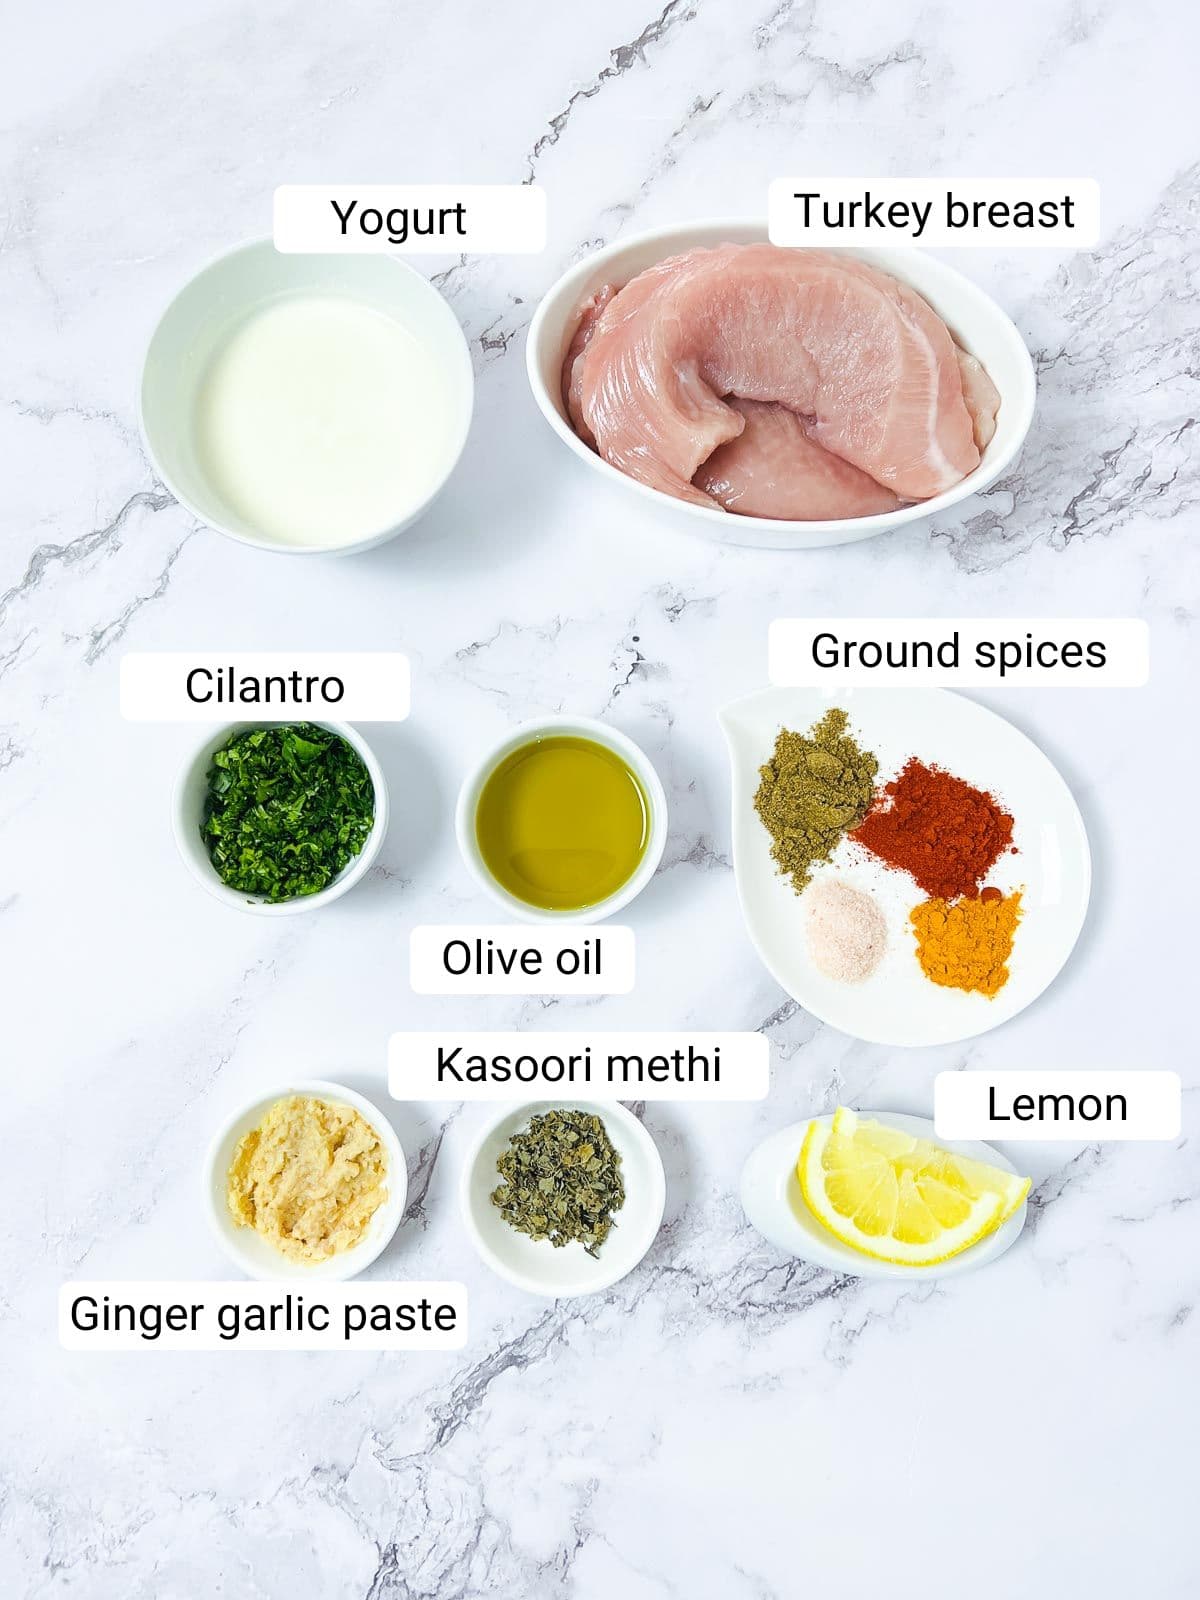 Ingredients to make tandoori turkey placed on a marble surface.